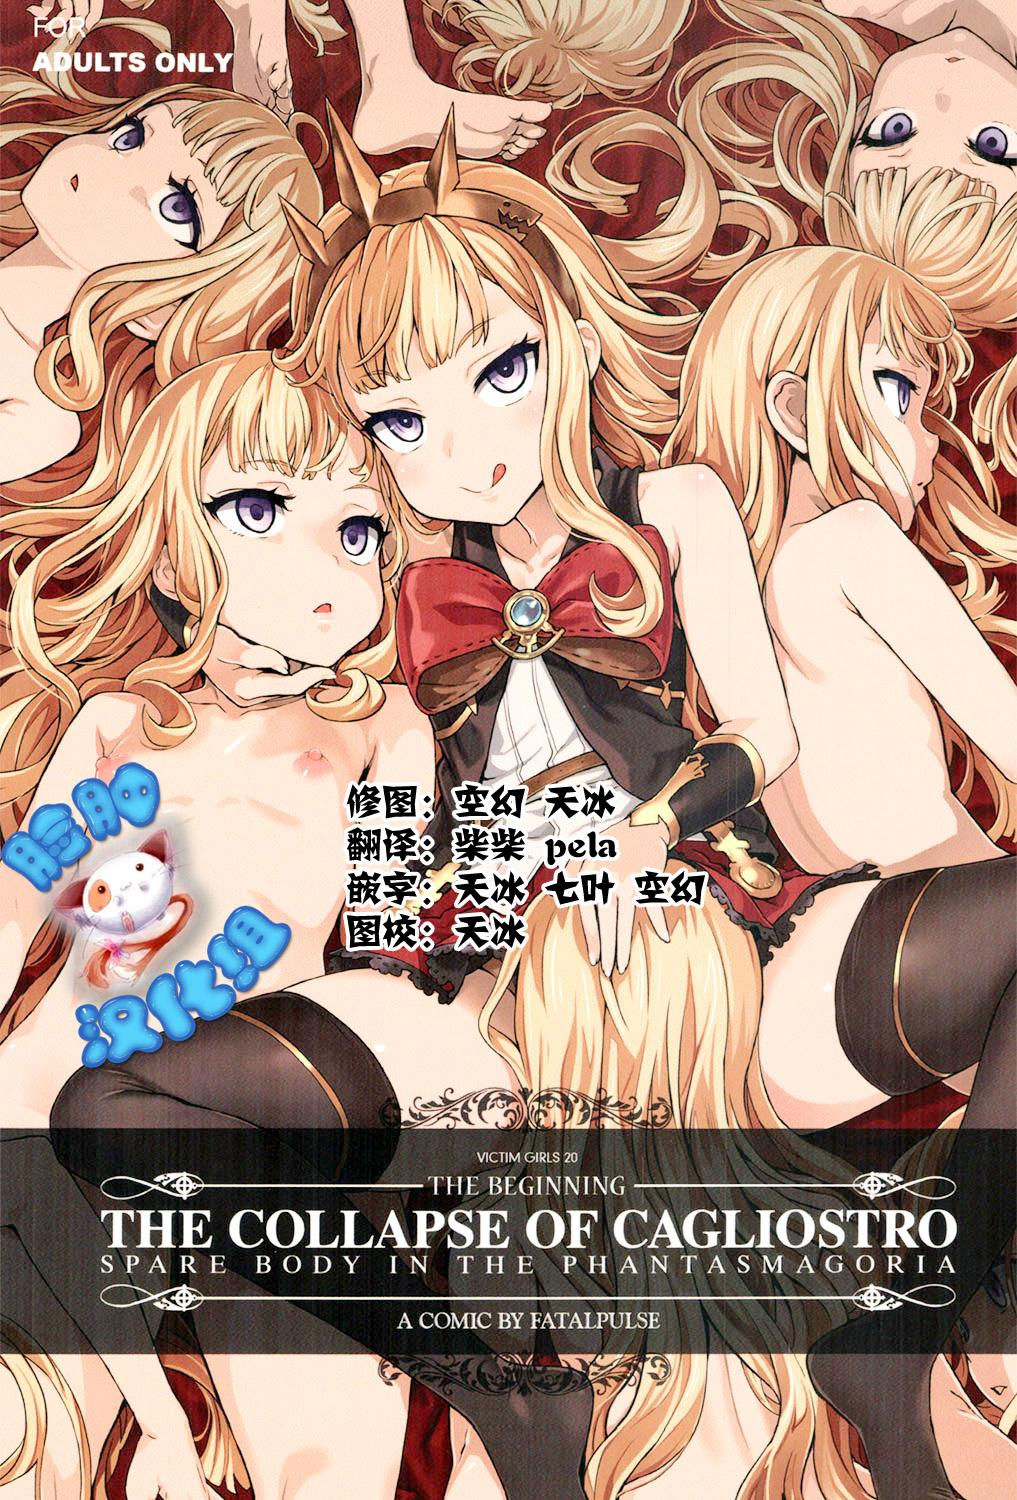 Babysitter Victim Girls 20 THE COLLAPSE OF CAGLIOSTRO - Granblue fantasy Horny - Page 1